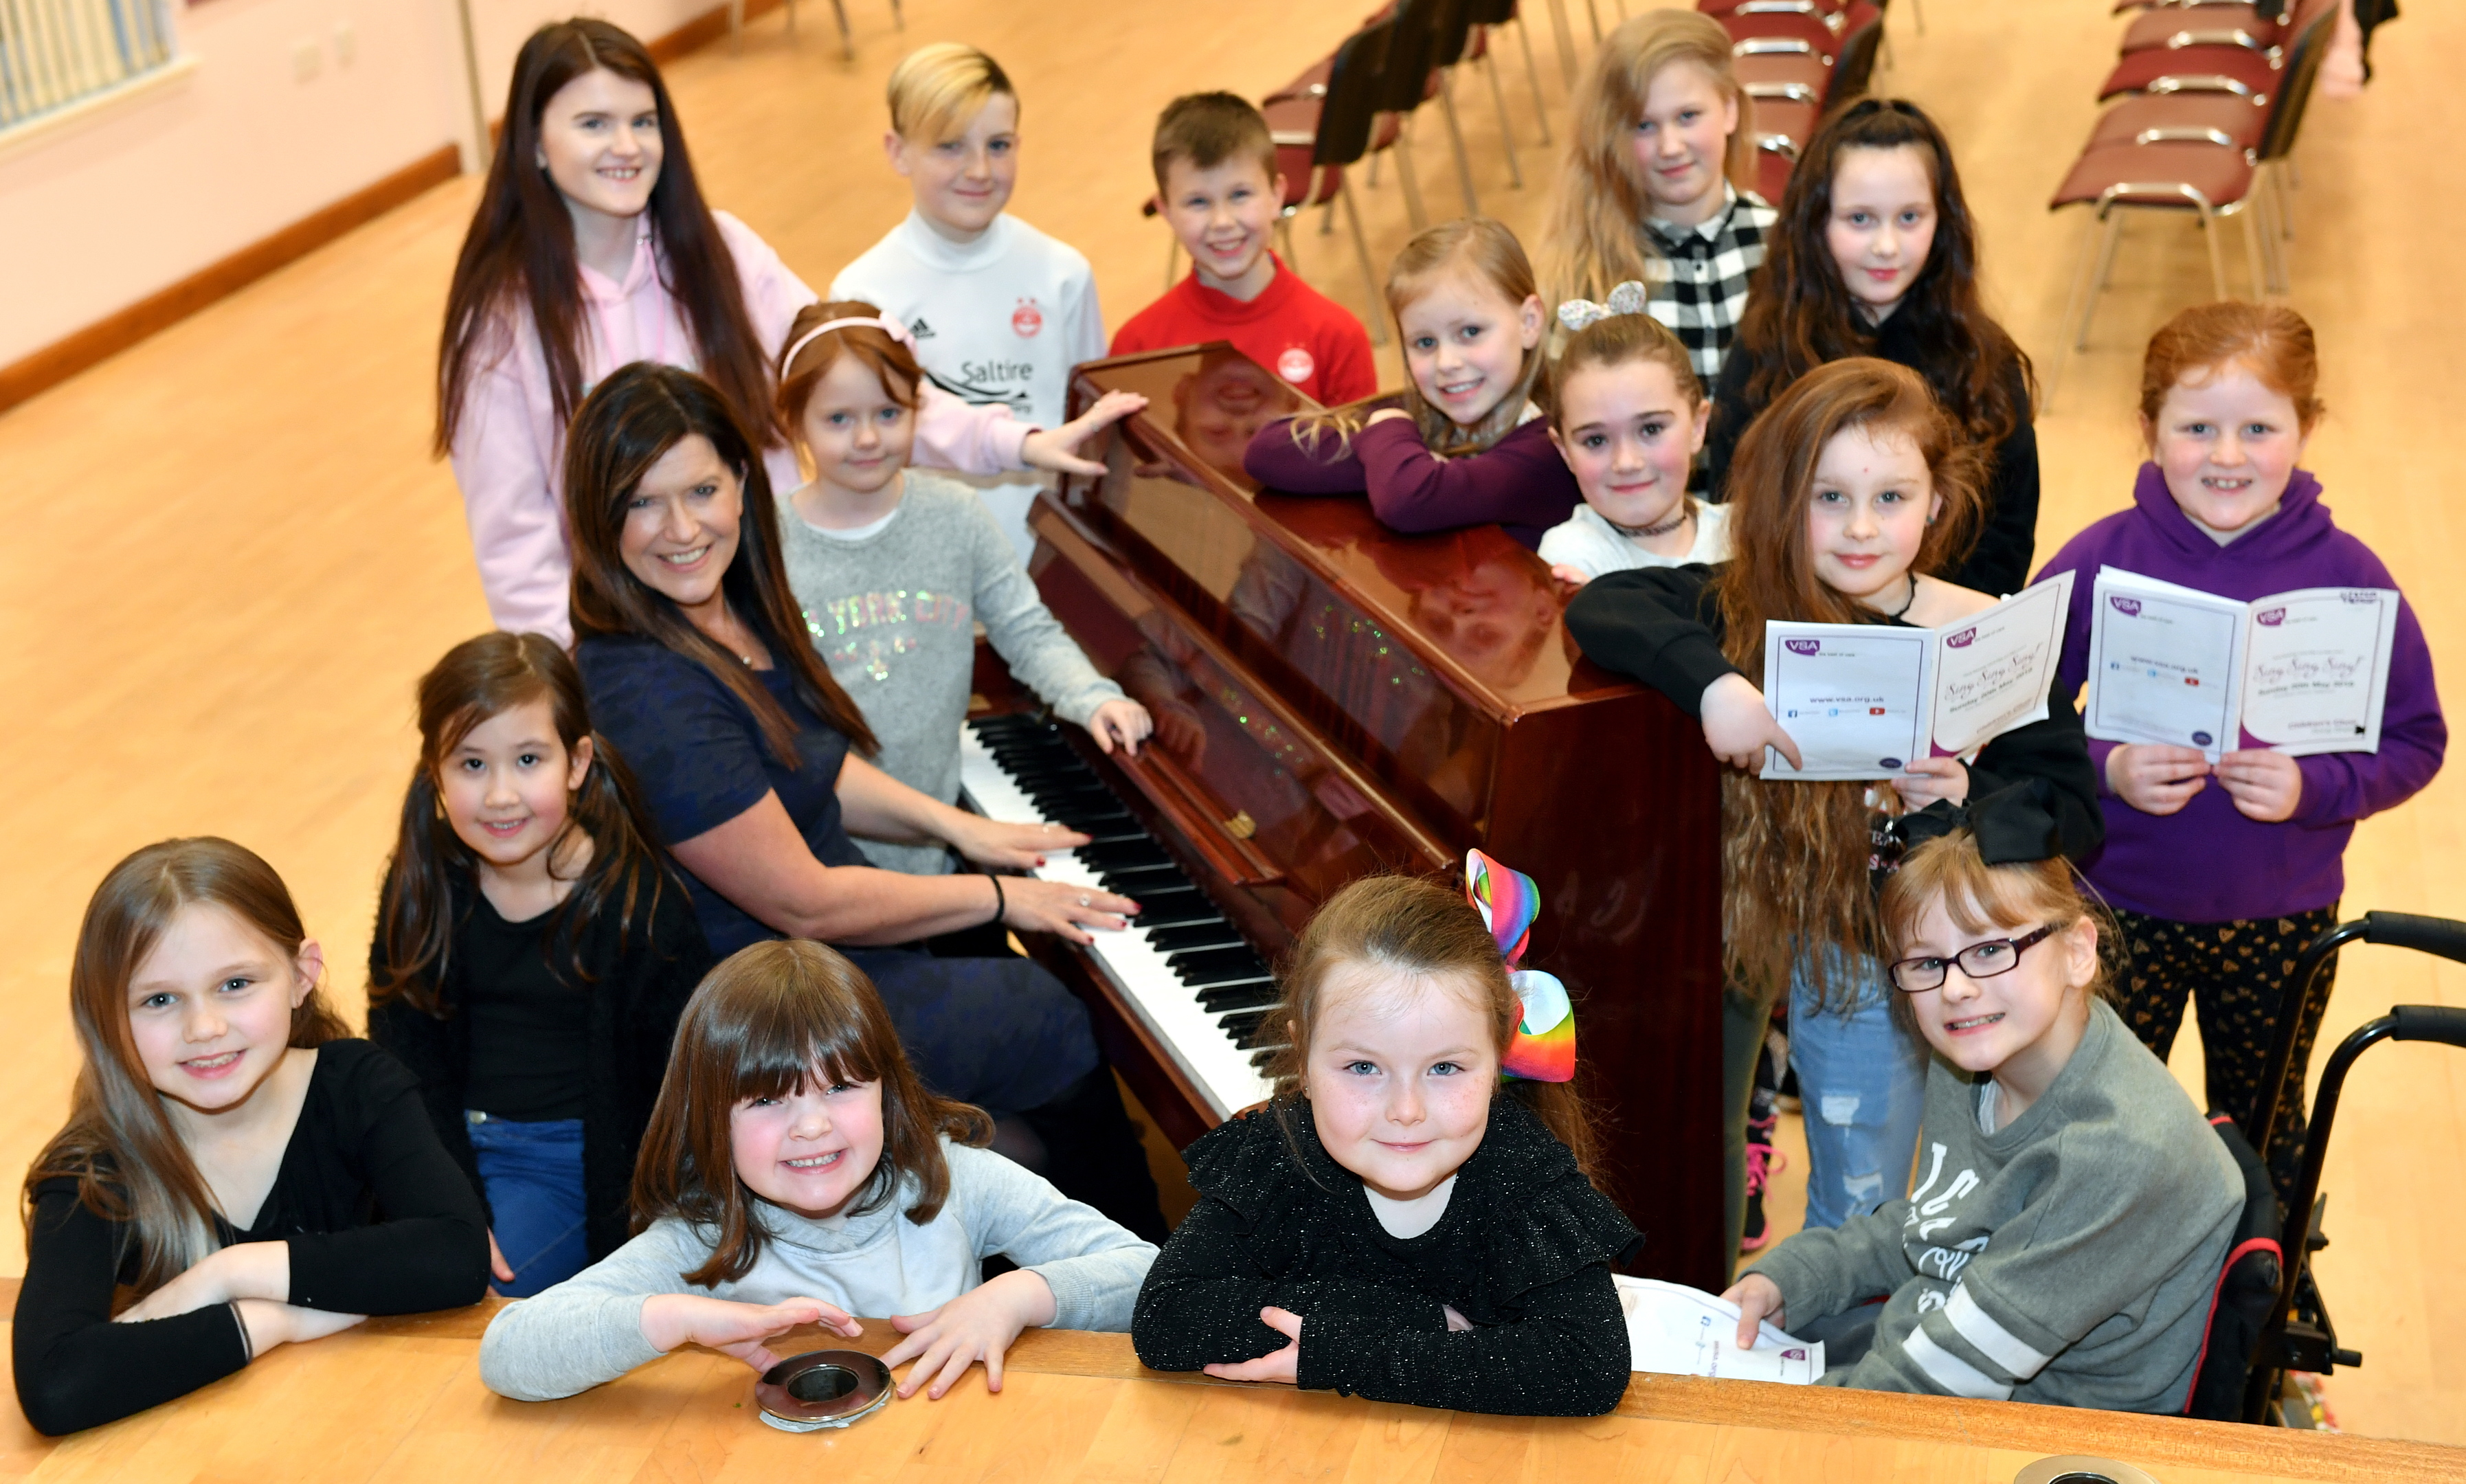 Preview for the VSA Sing Sing Sing, choral competition at the Beach Ballroom, Aberdeen, on 20th May.    
Pictured - Laura Pike at the piano with the Sing Sing Sing childrens choir for rehearsals.     
Picture by Kami Thomson.